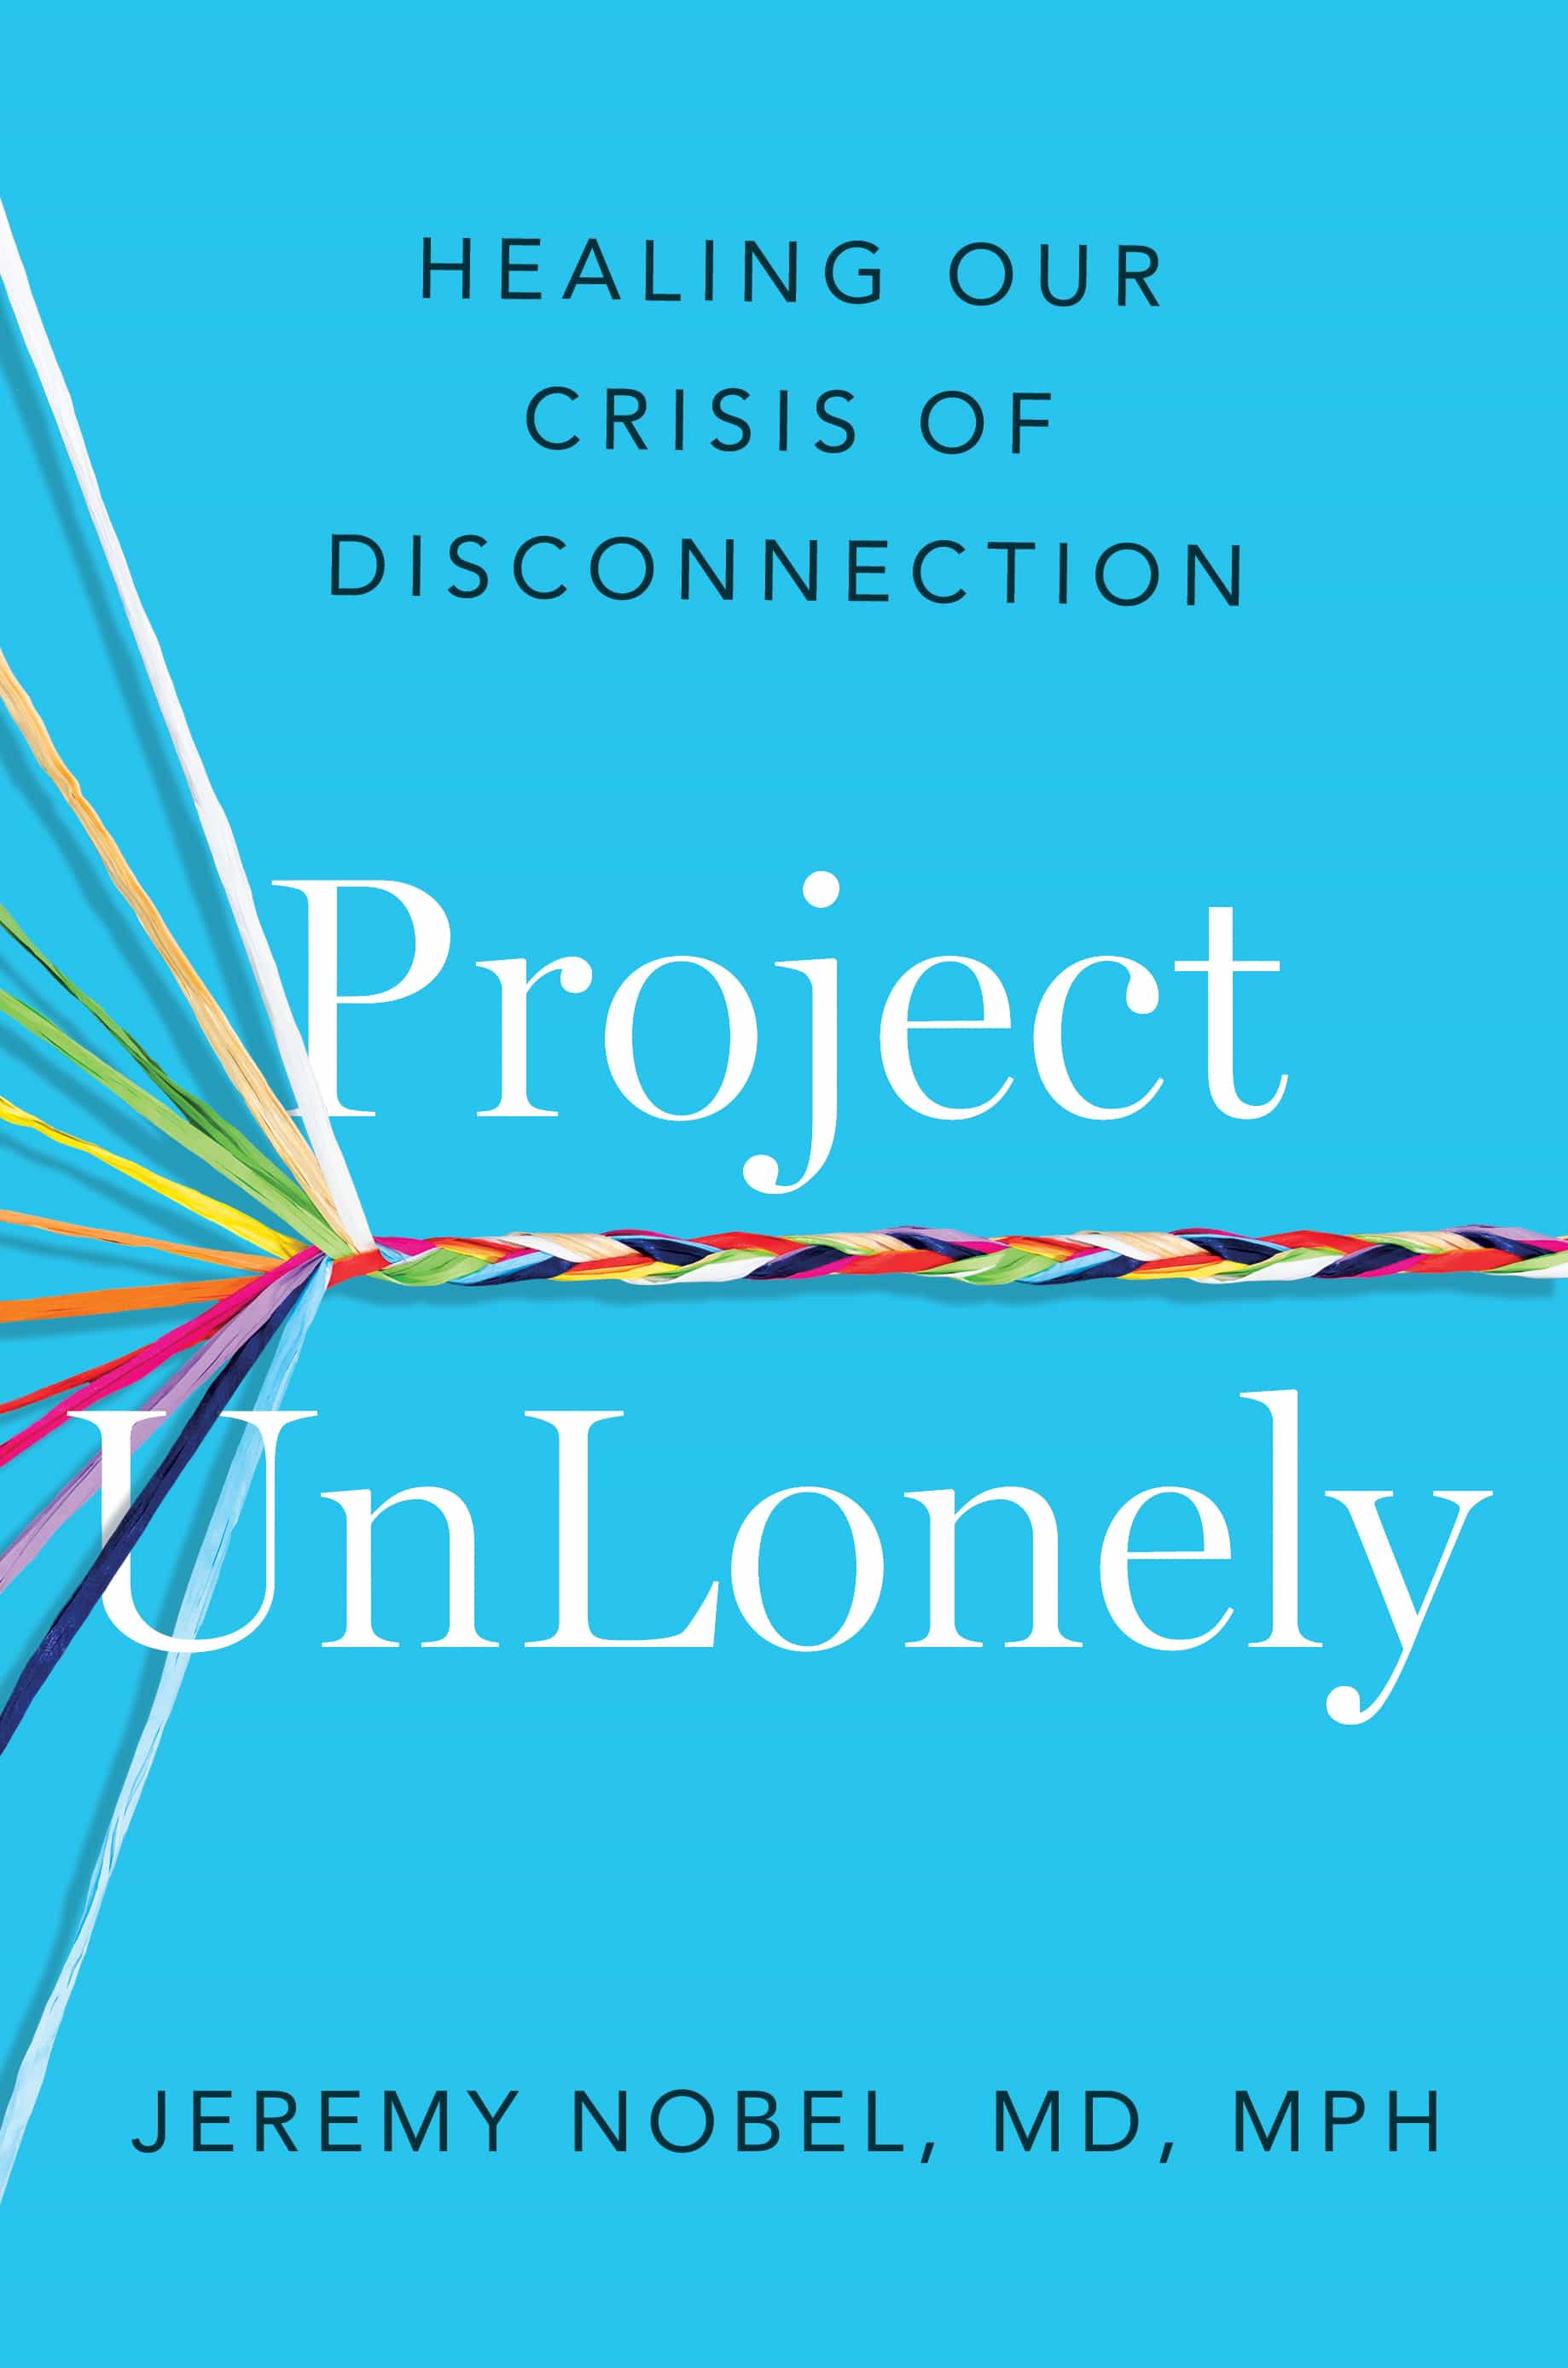 Project UnLonely book cover